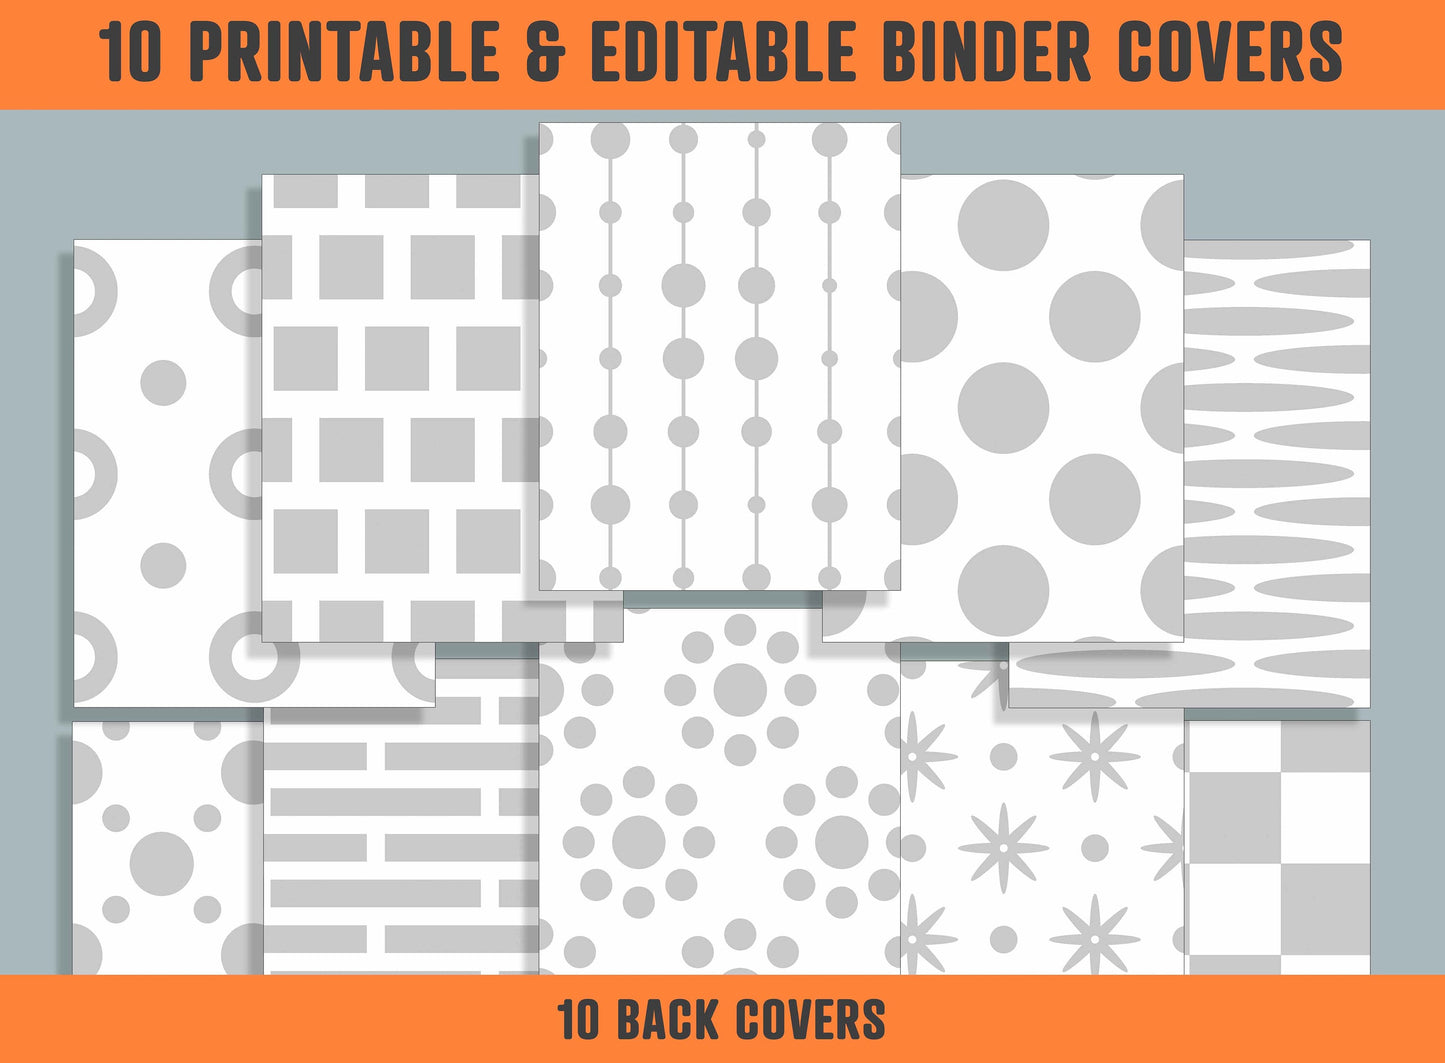 Geometric Patterns Collection Binder Covers, 10 Printable & Editable Binder Covers + Spines, Teacher/School Planner Template/Label/Insert